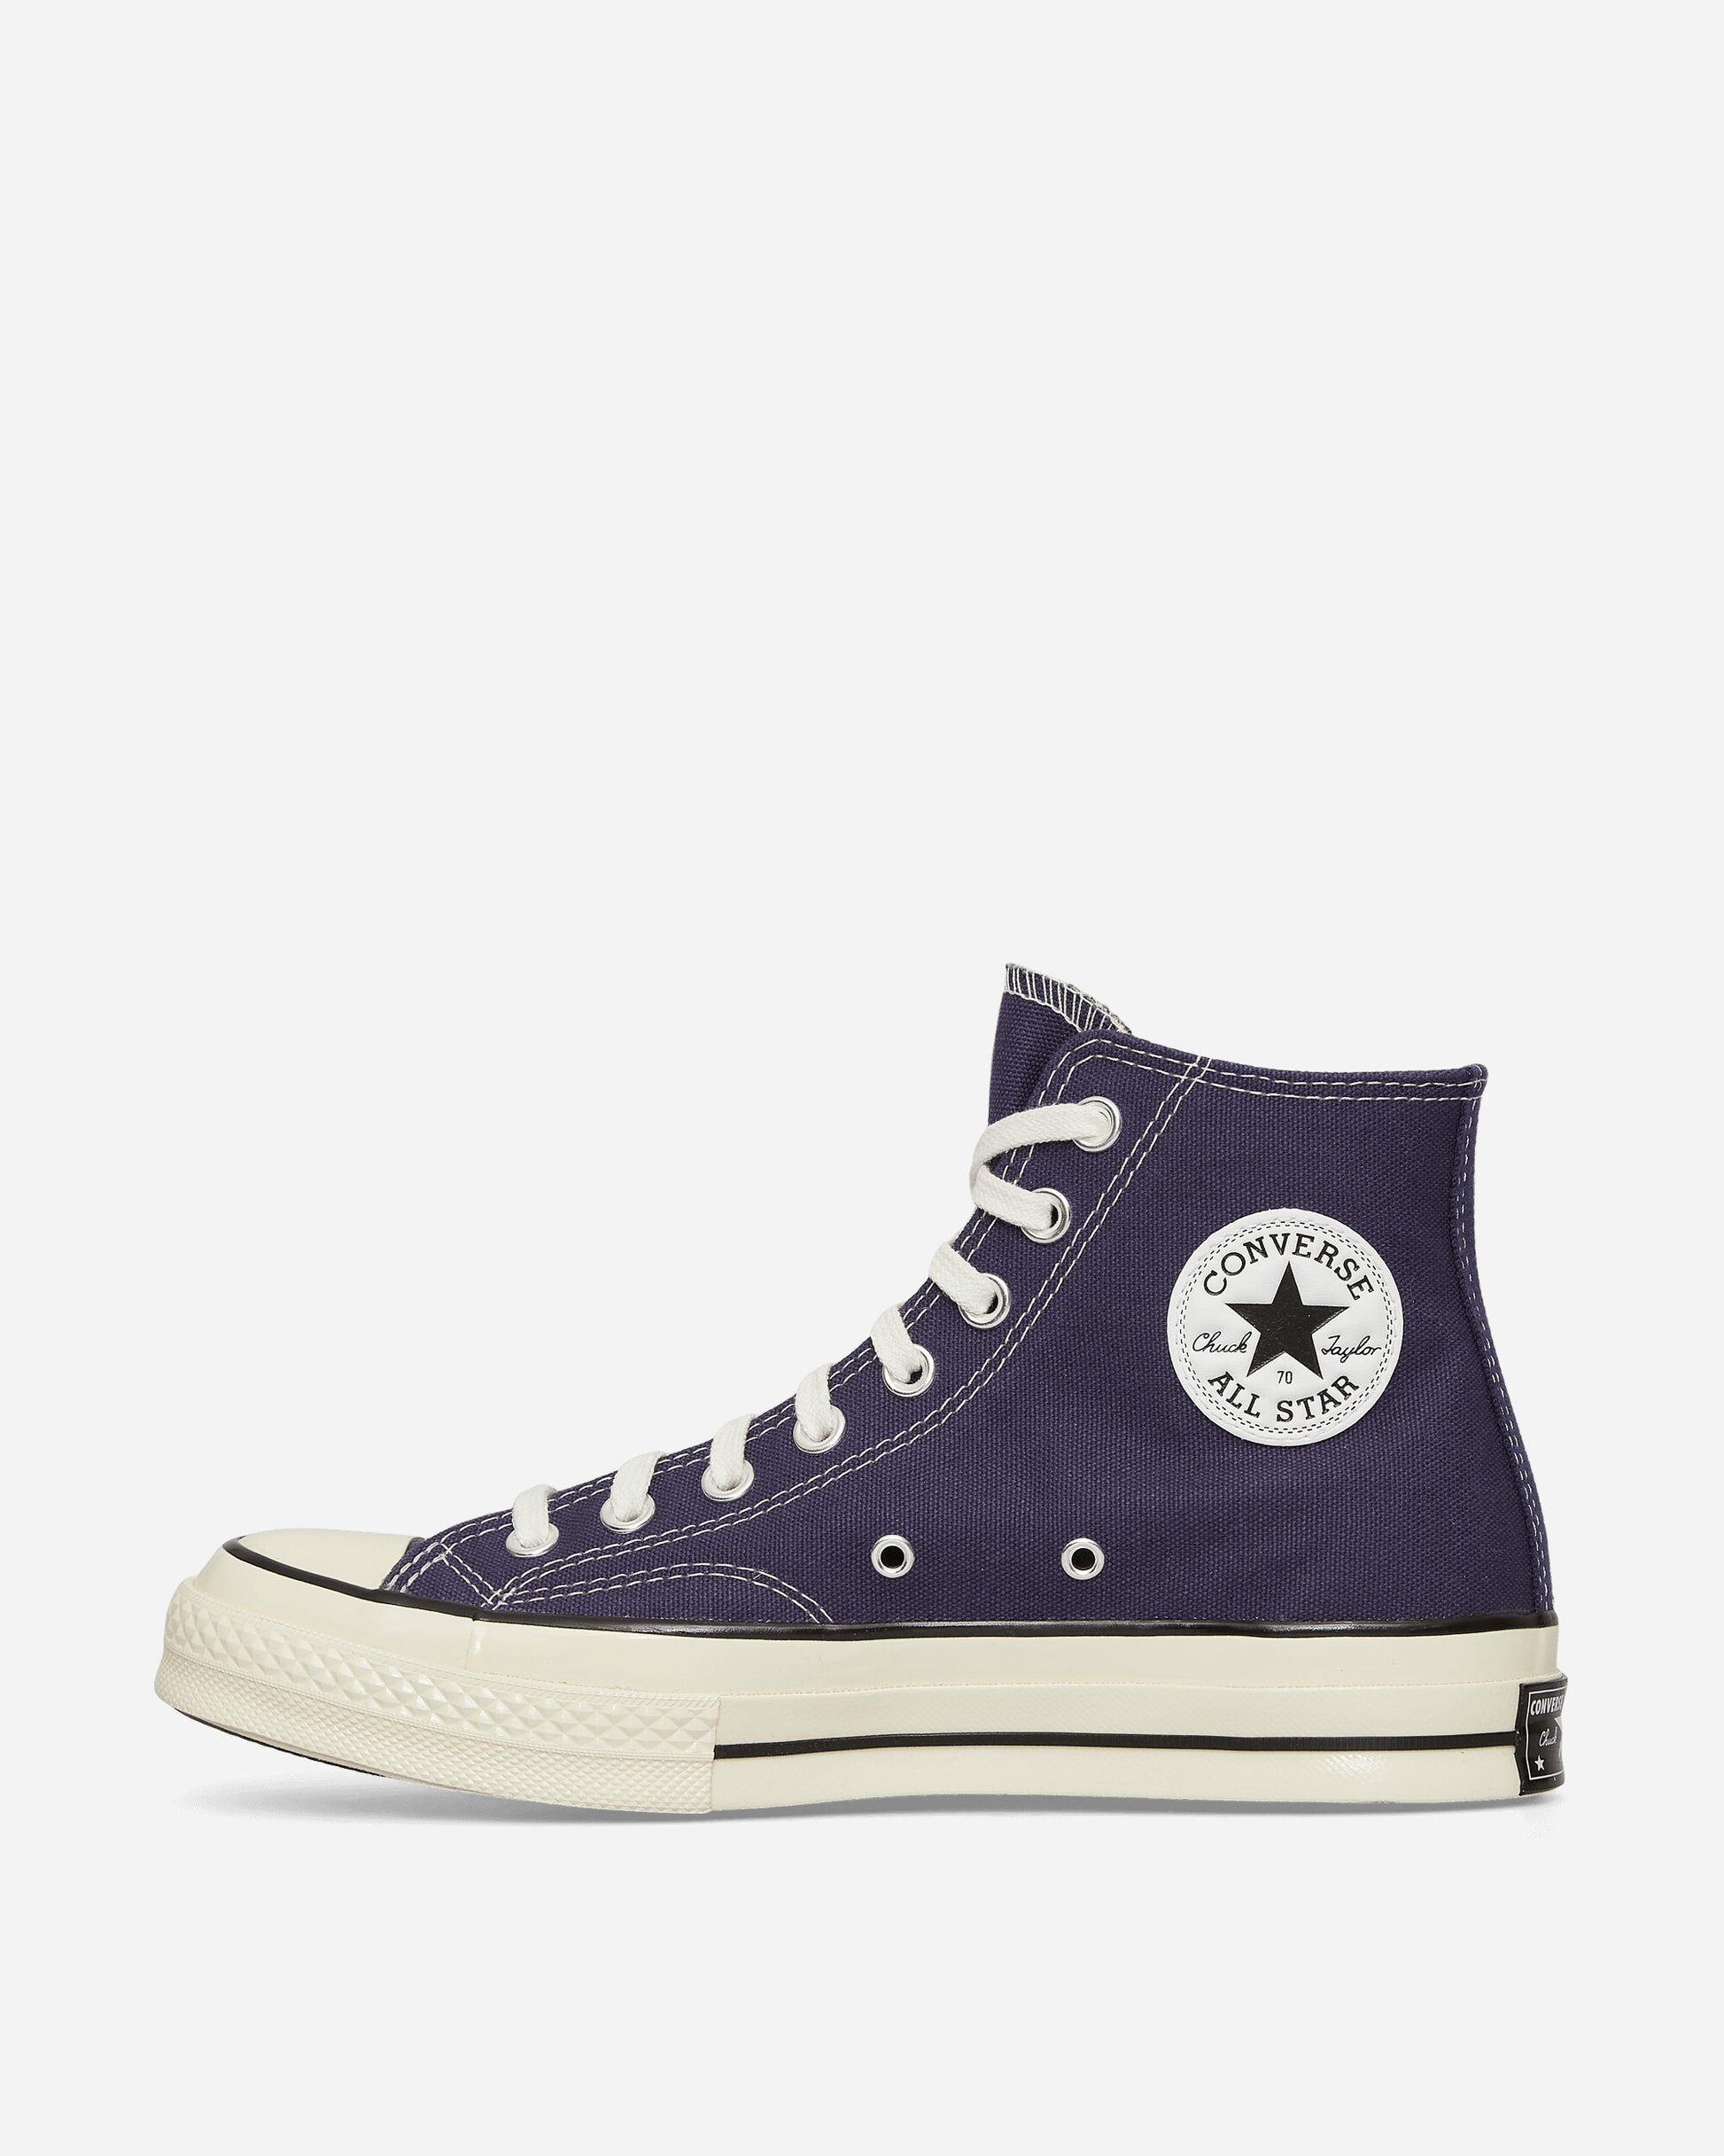 Converse Chuck 70 Uncharted Waters/Egret/Black Sneakers High A04589C